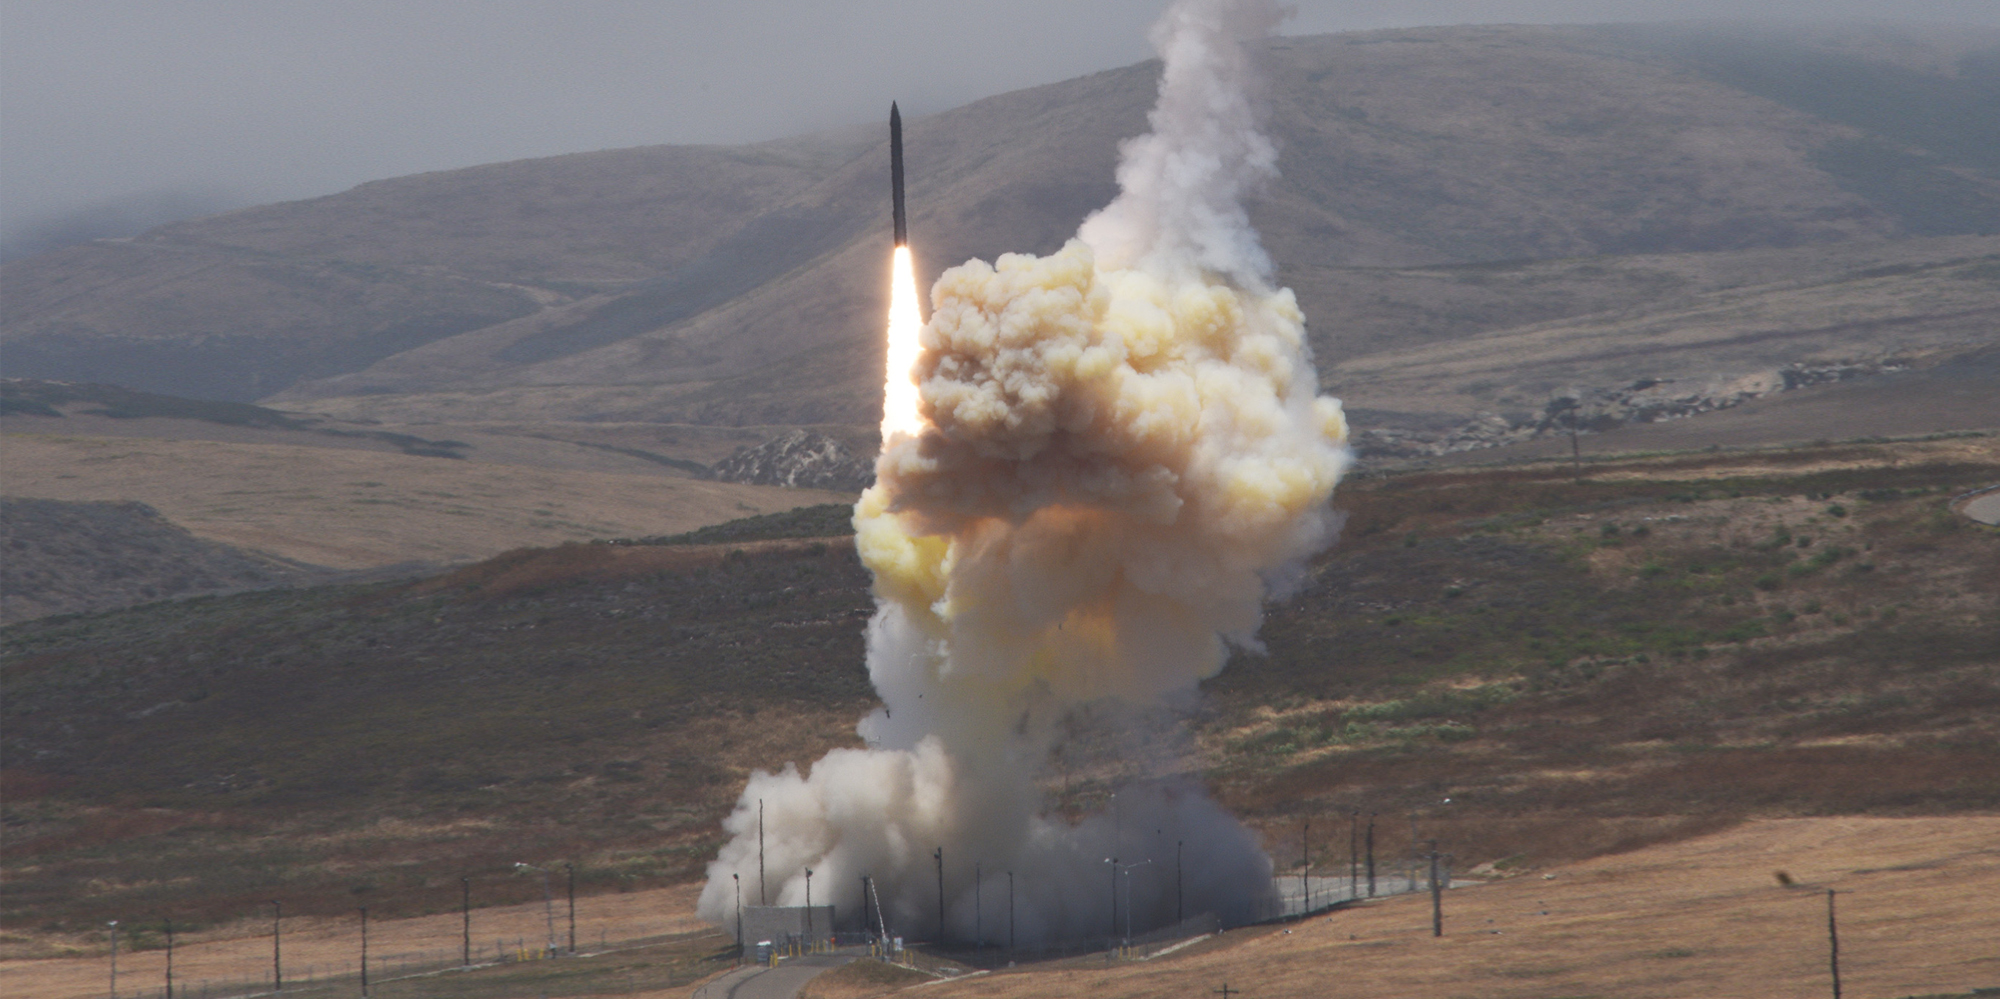 A missile interceptor launching from test field in to a gray sky in front of mountains